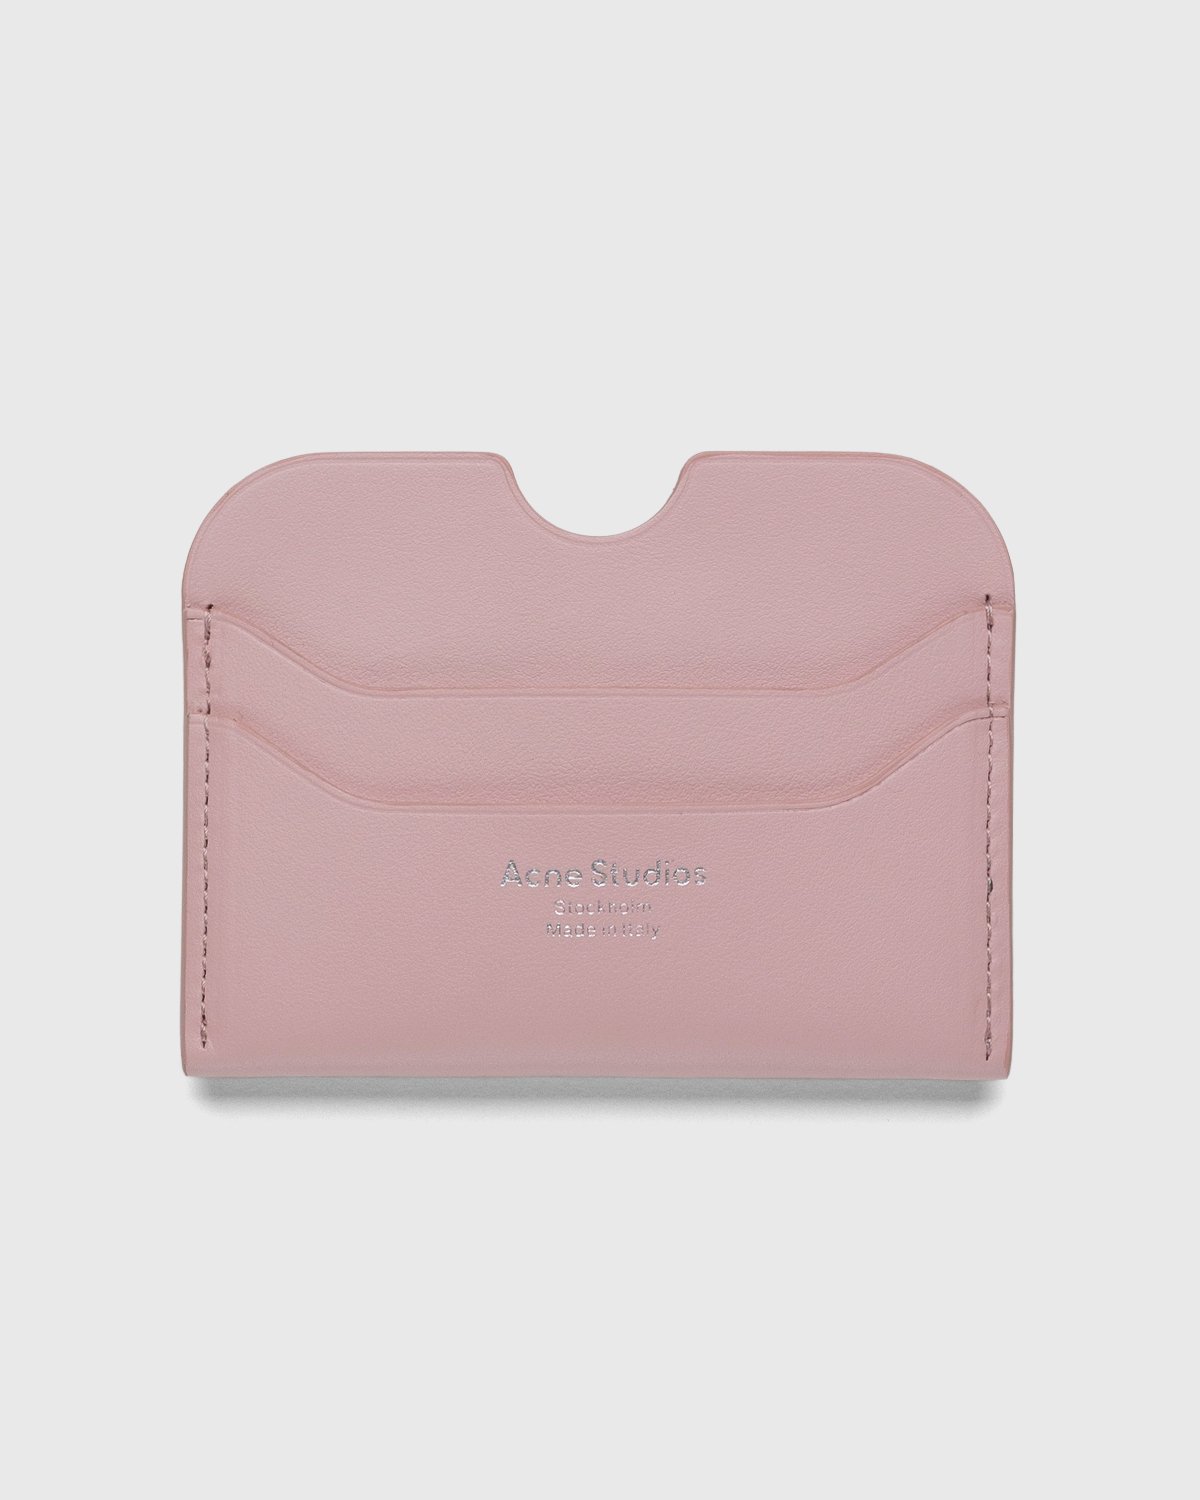 Acne Studios - Leather Card Case Powder Pink - Accessories - Pink - Image 1